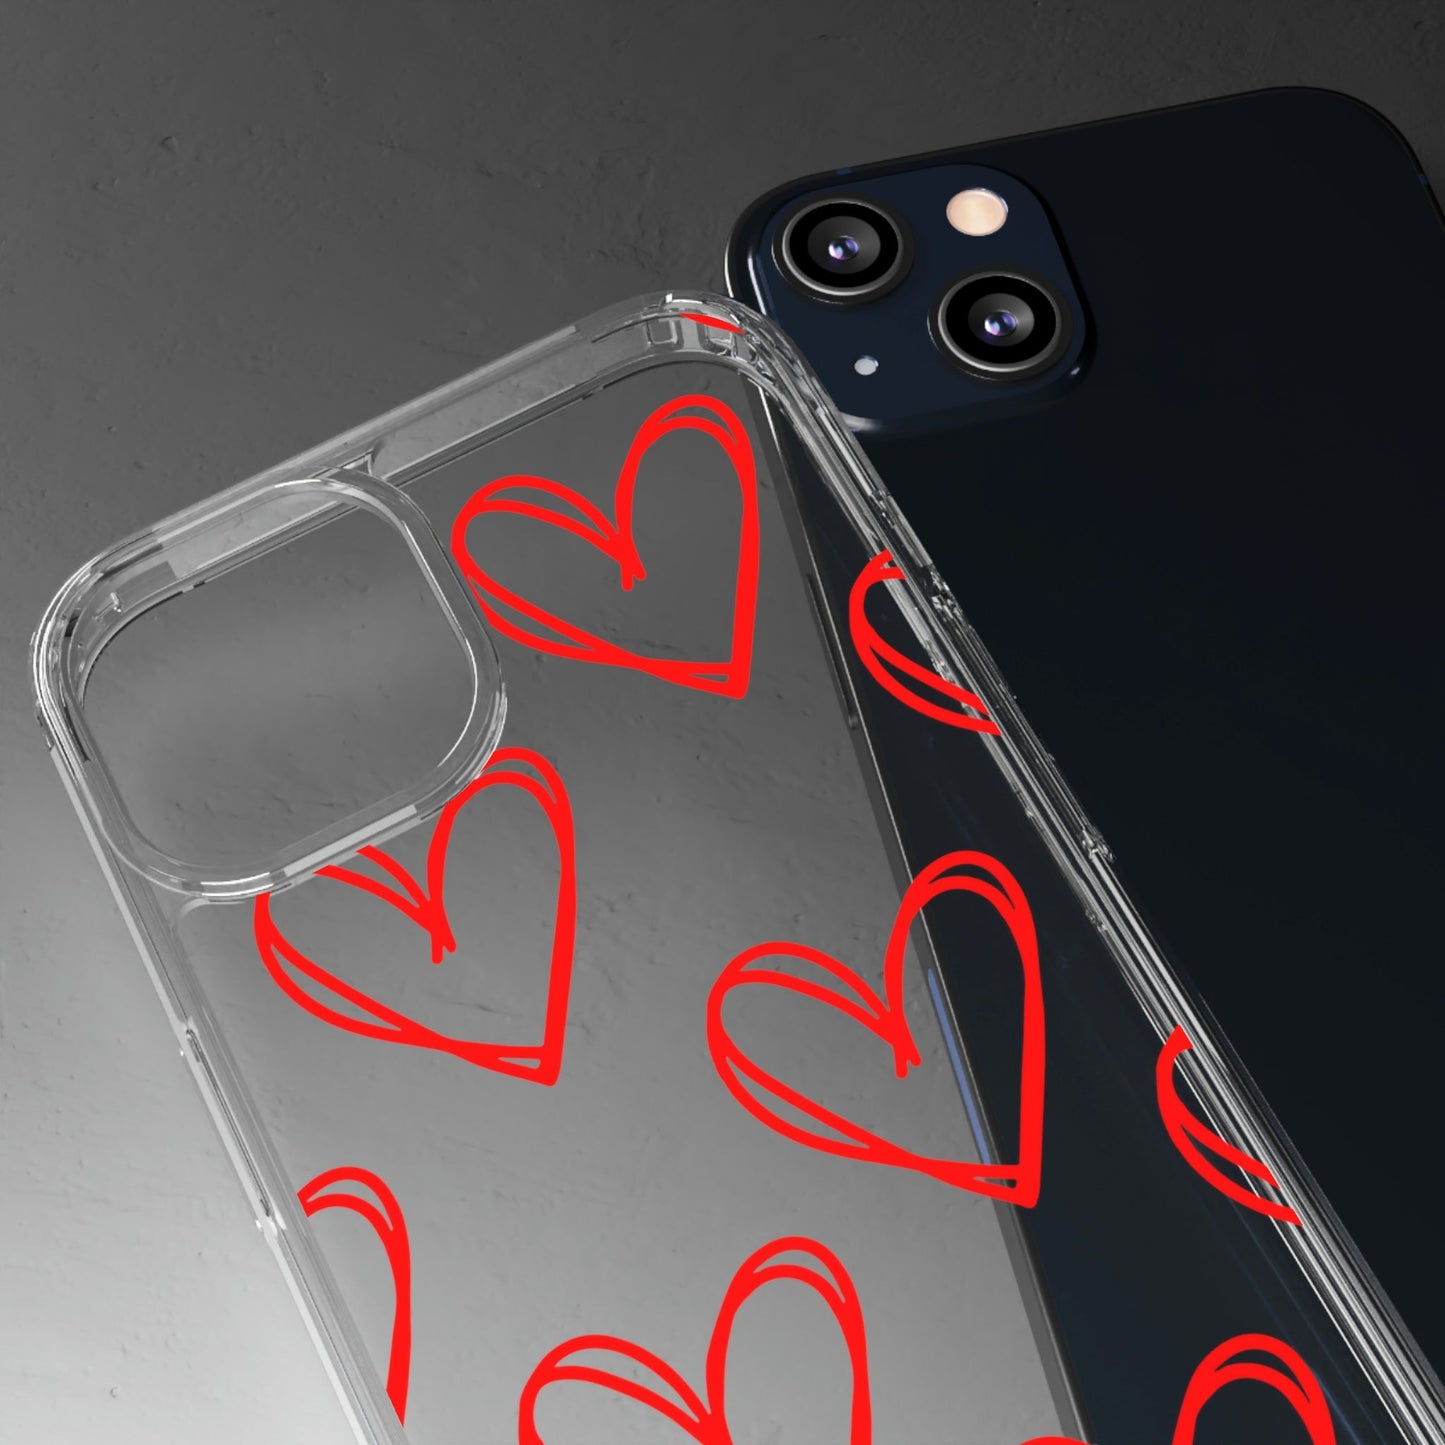 Couple Heart Clear Case - Classy Cases